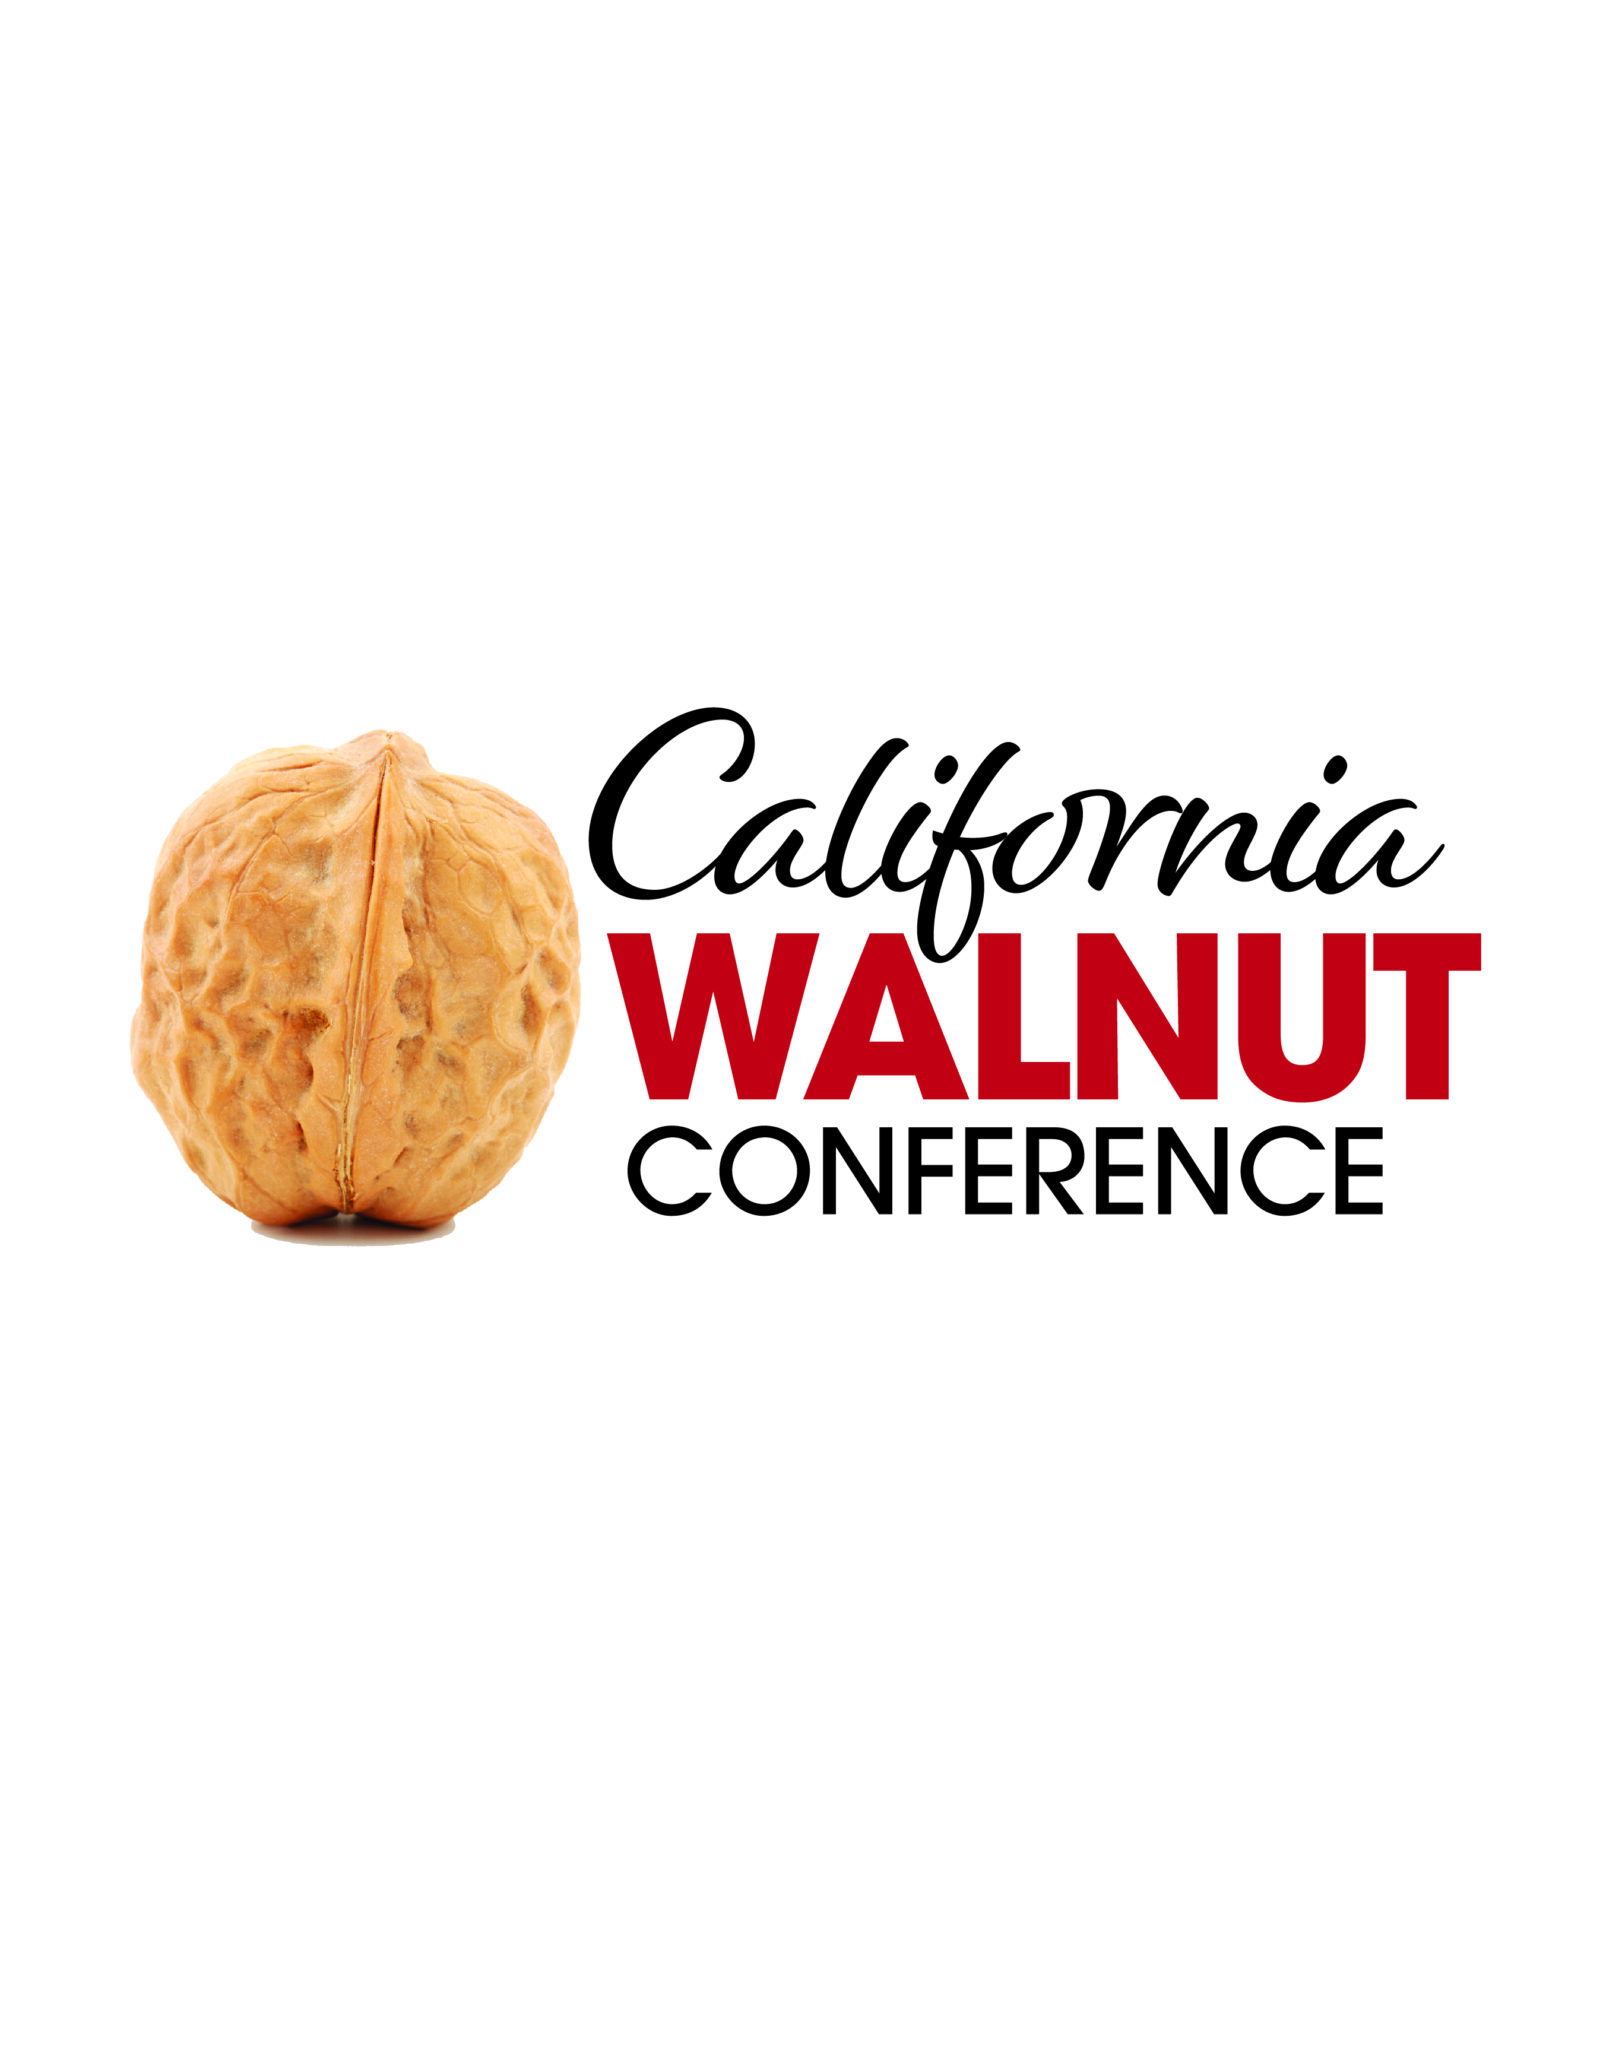 The 2021 California Walnut Conference is virtual this year! Sign up